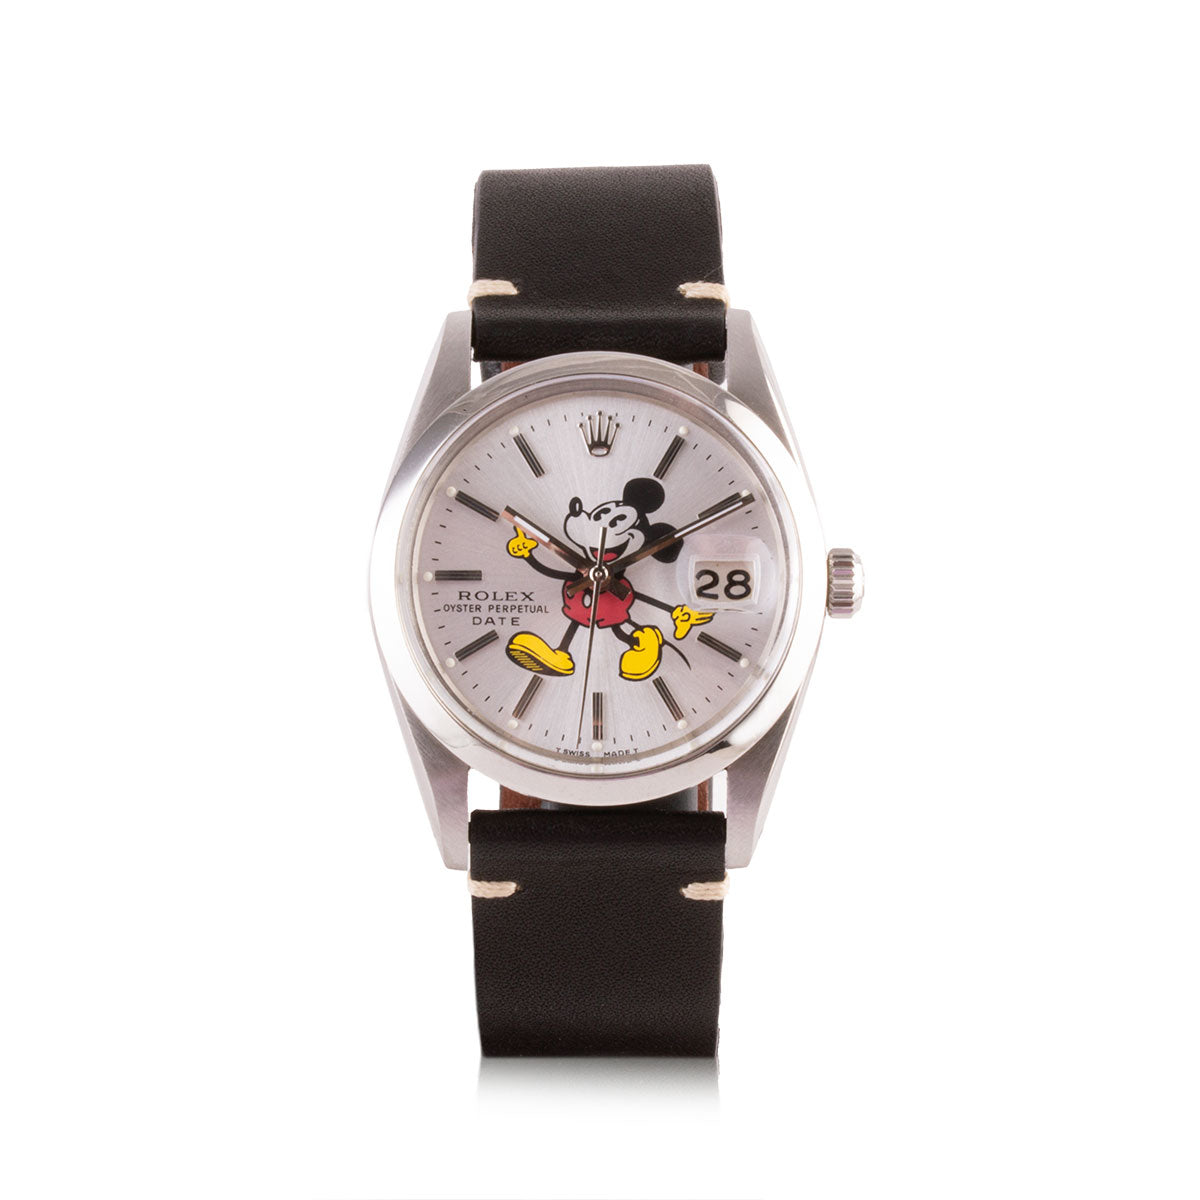 Montre d'occasion - Rolex - Oyster Perpetual Date "Mickey" - 4250€